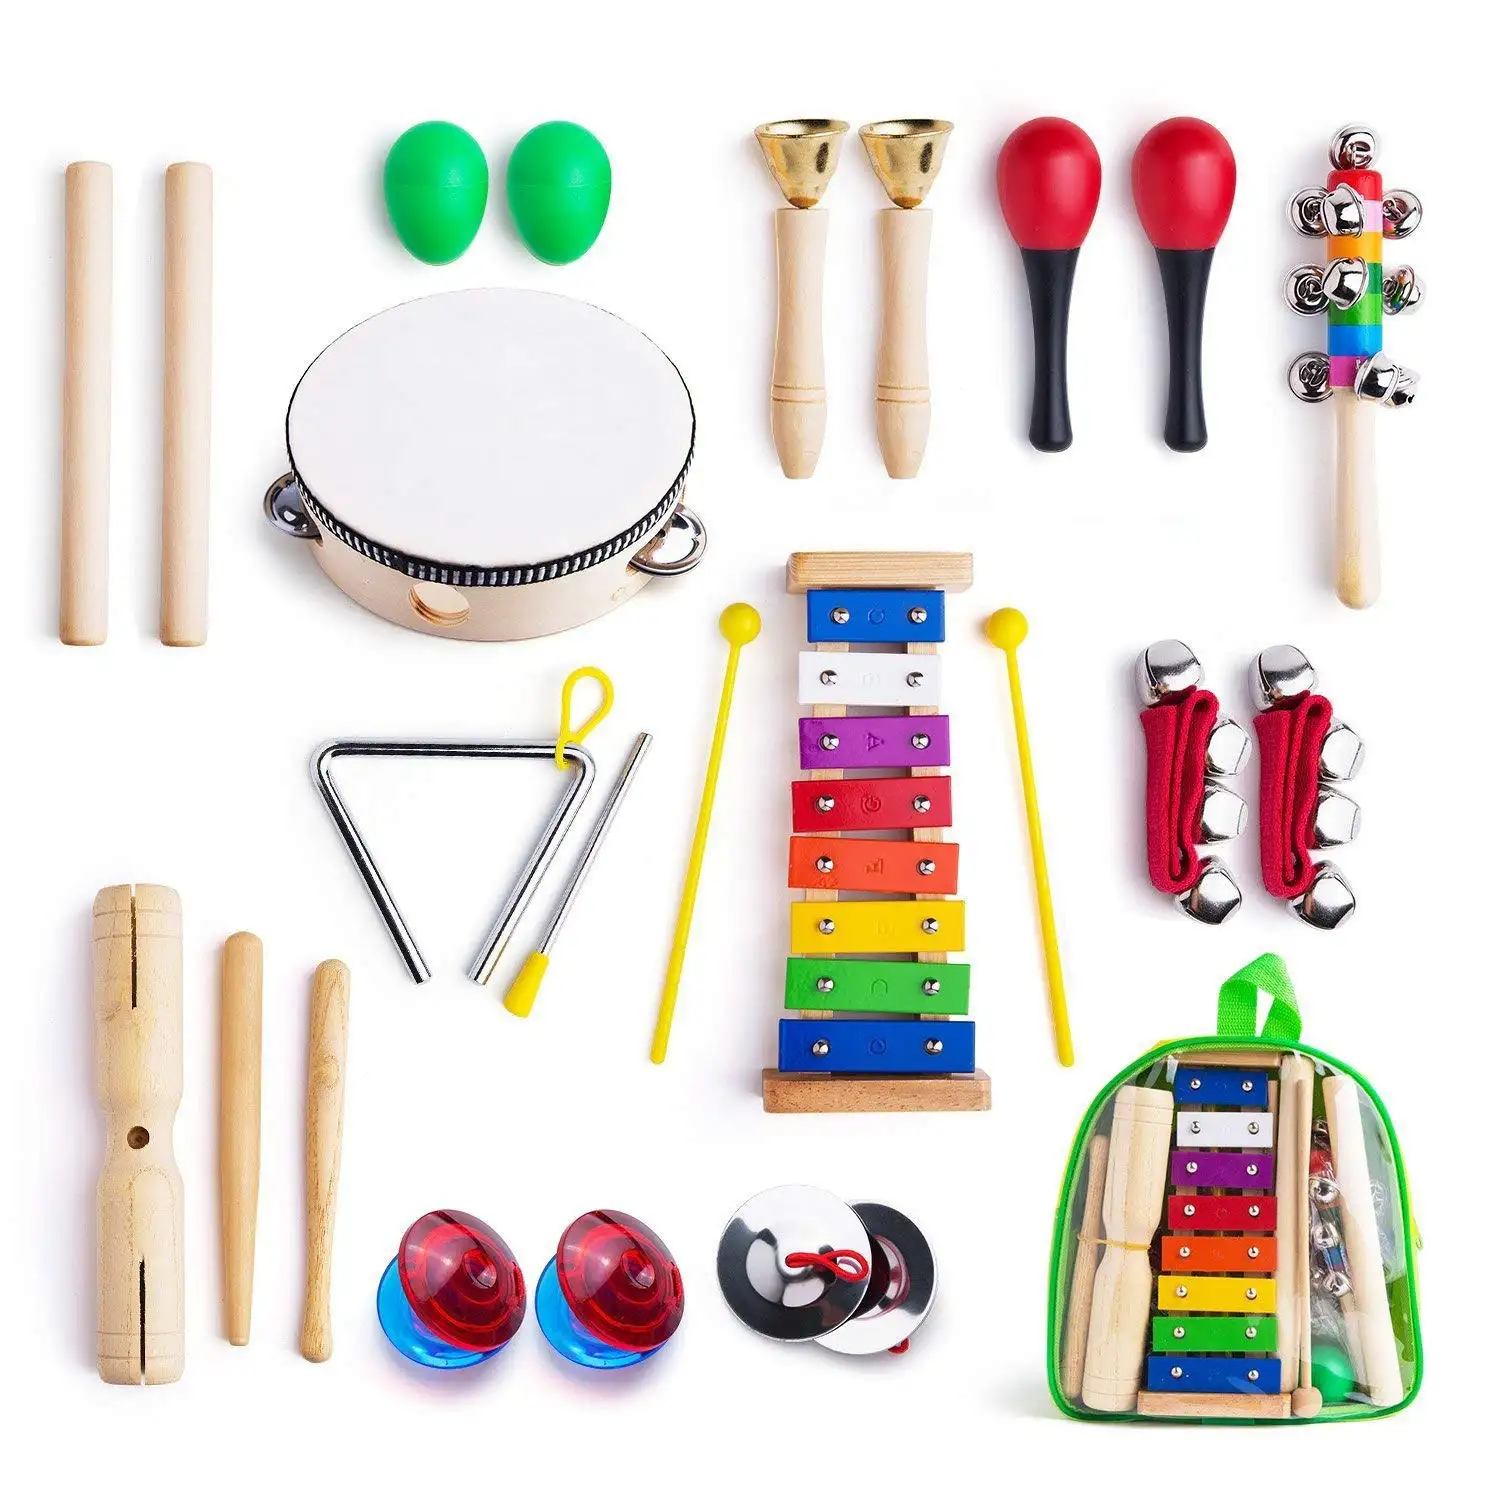 Rhythm Band Musical Instruments for Toddler with Carry Bag,12 in 1 Music Percussion Toy Set for Kids